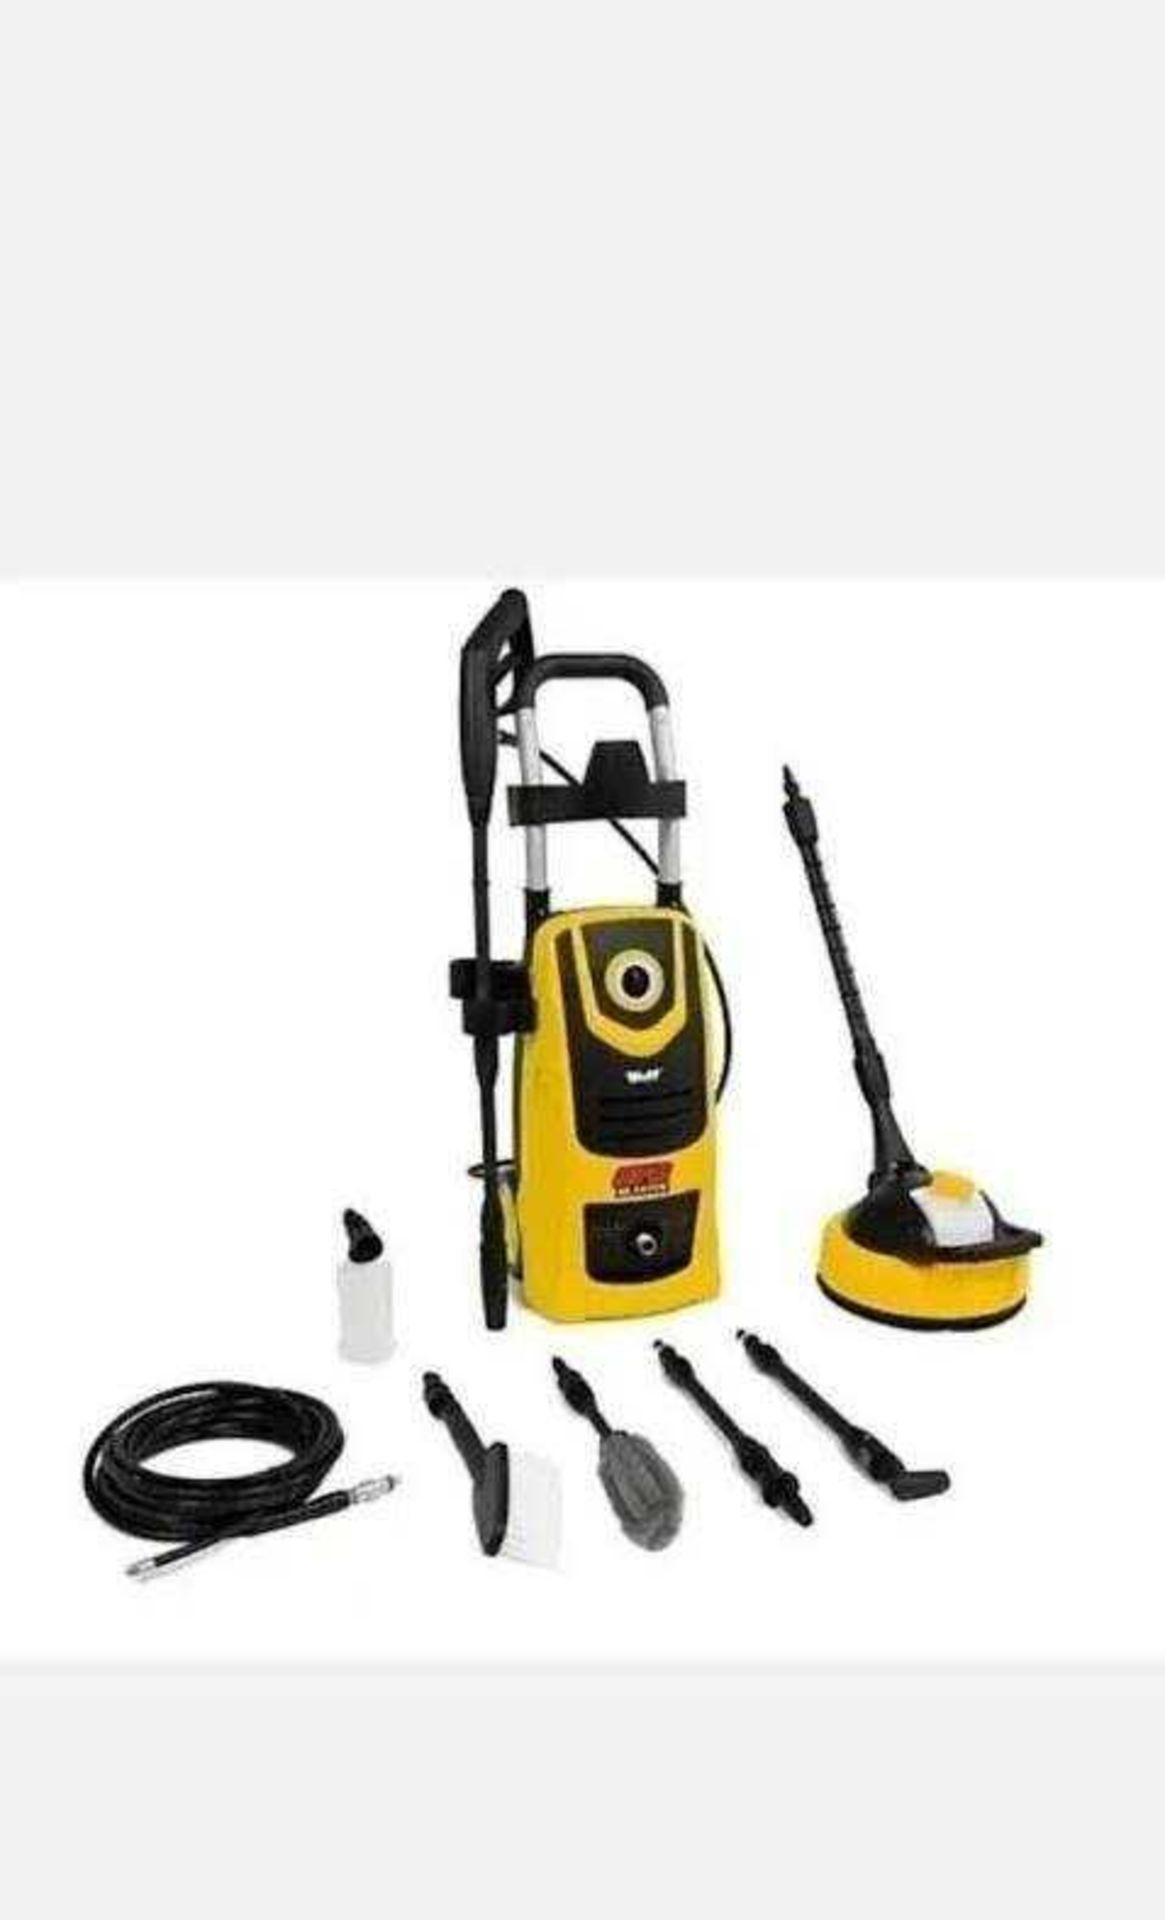 RRP £190 Boxed Brand New Wolf 140 Bar Super Blaster Pressure Washer With Outdoor & Car Accessories (